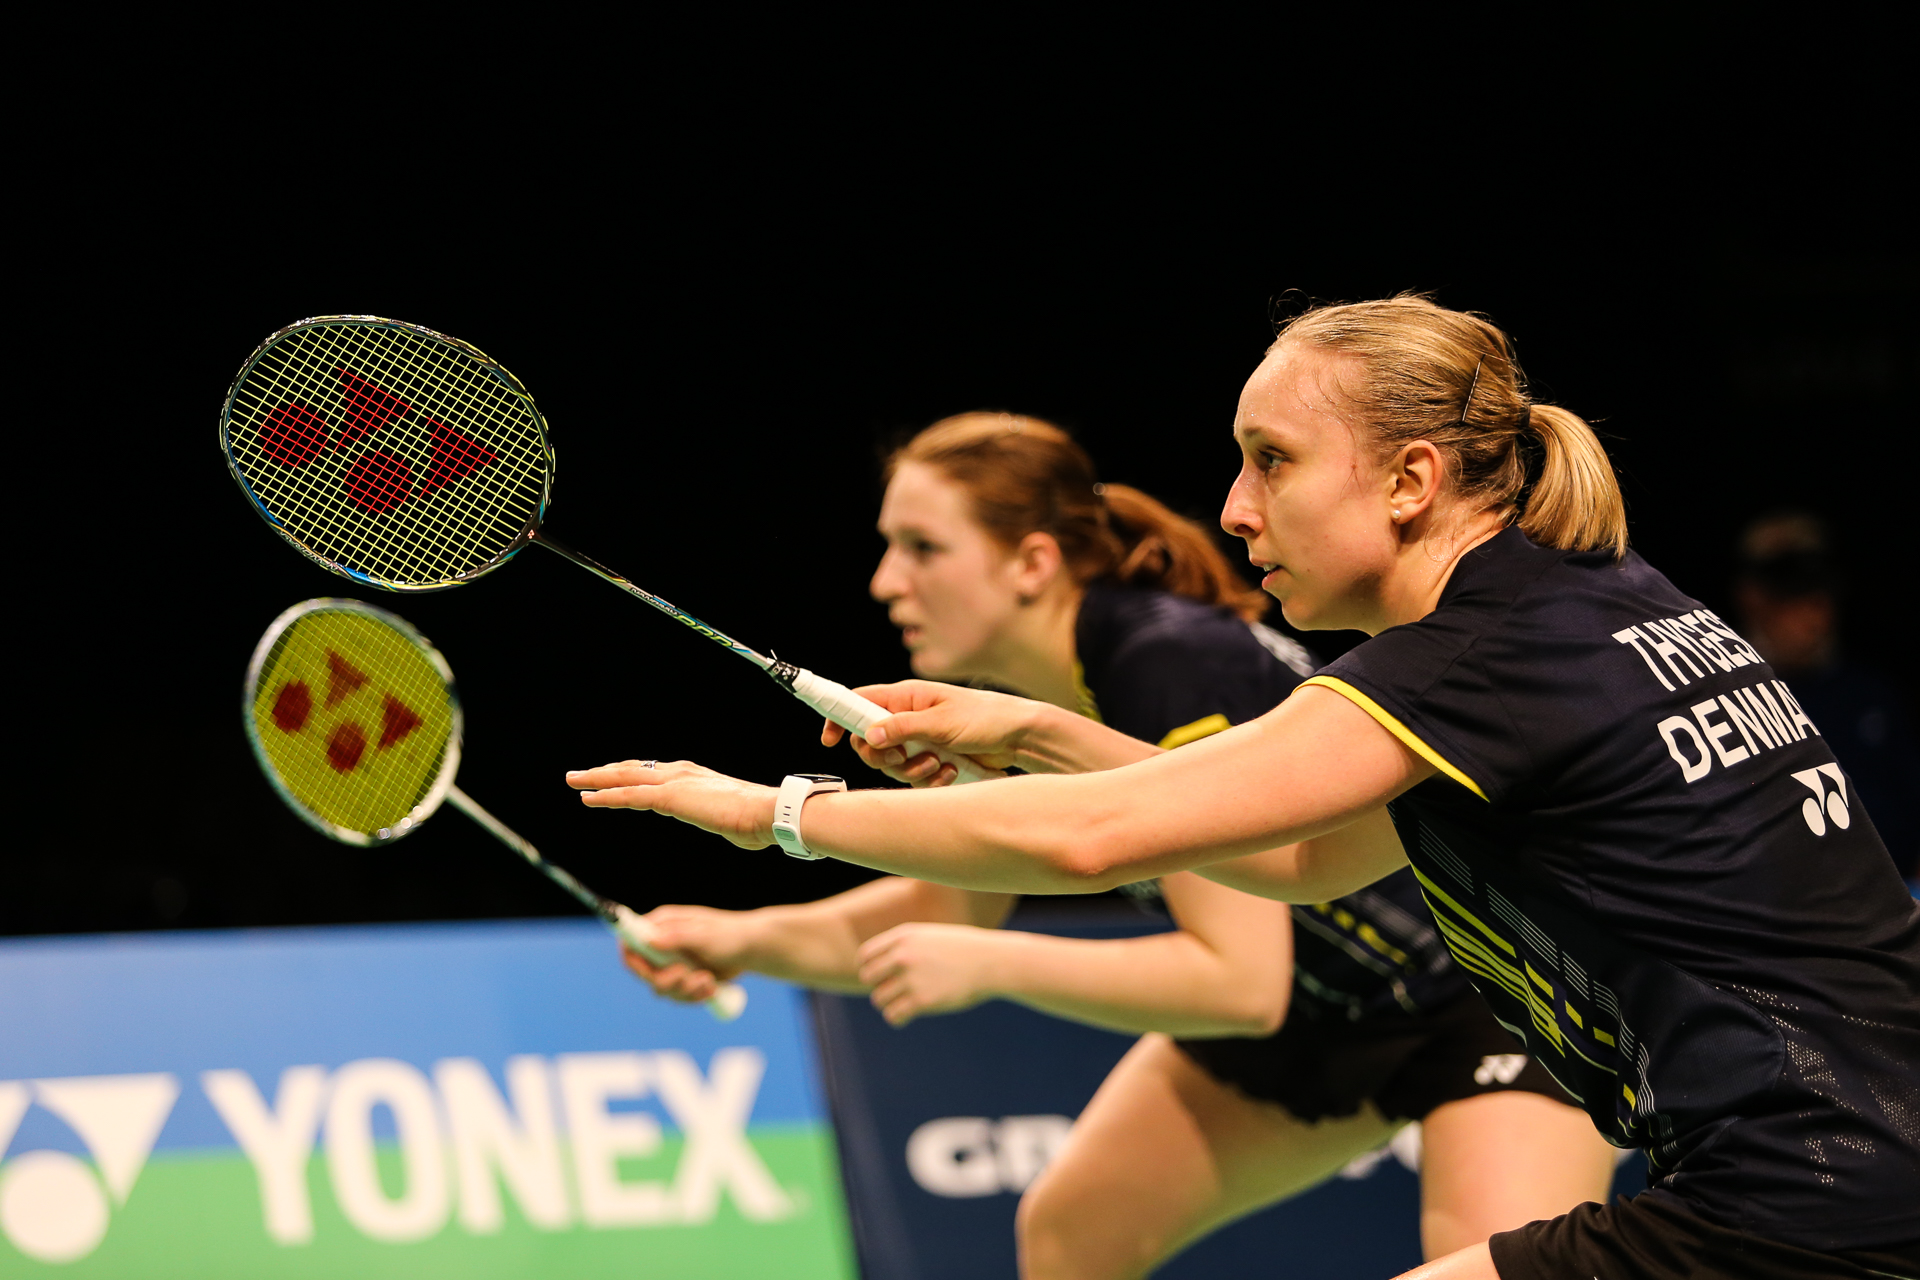 At national championships, players show why Denmark is a badminton